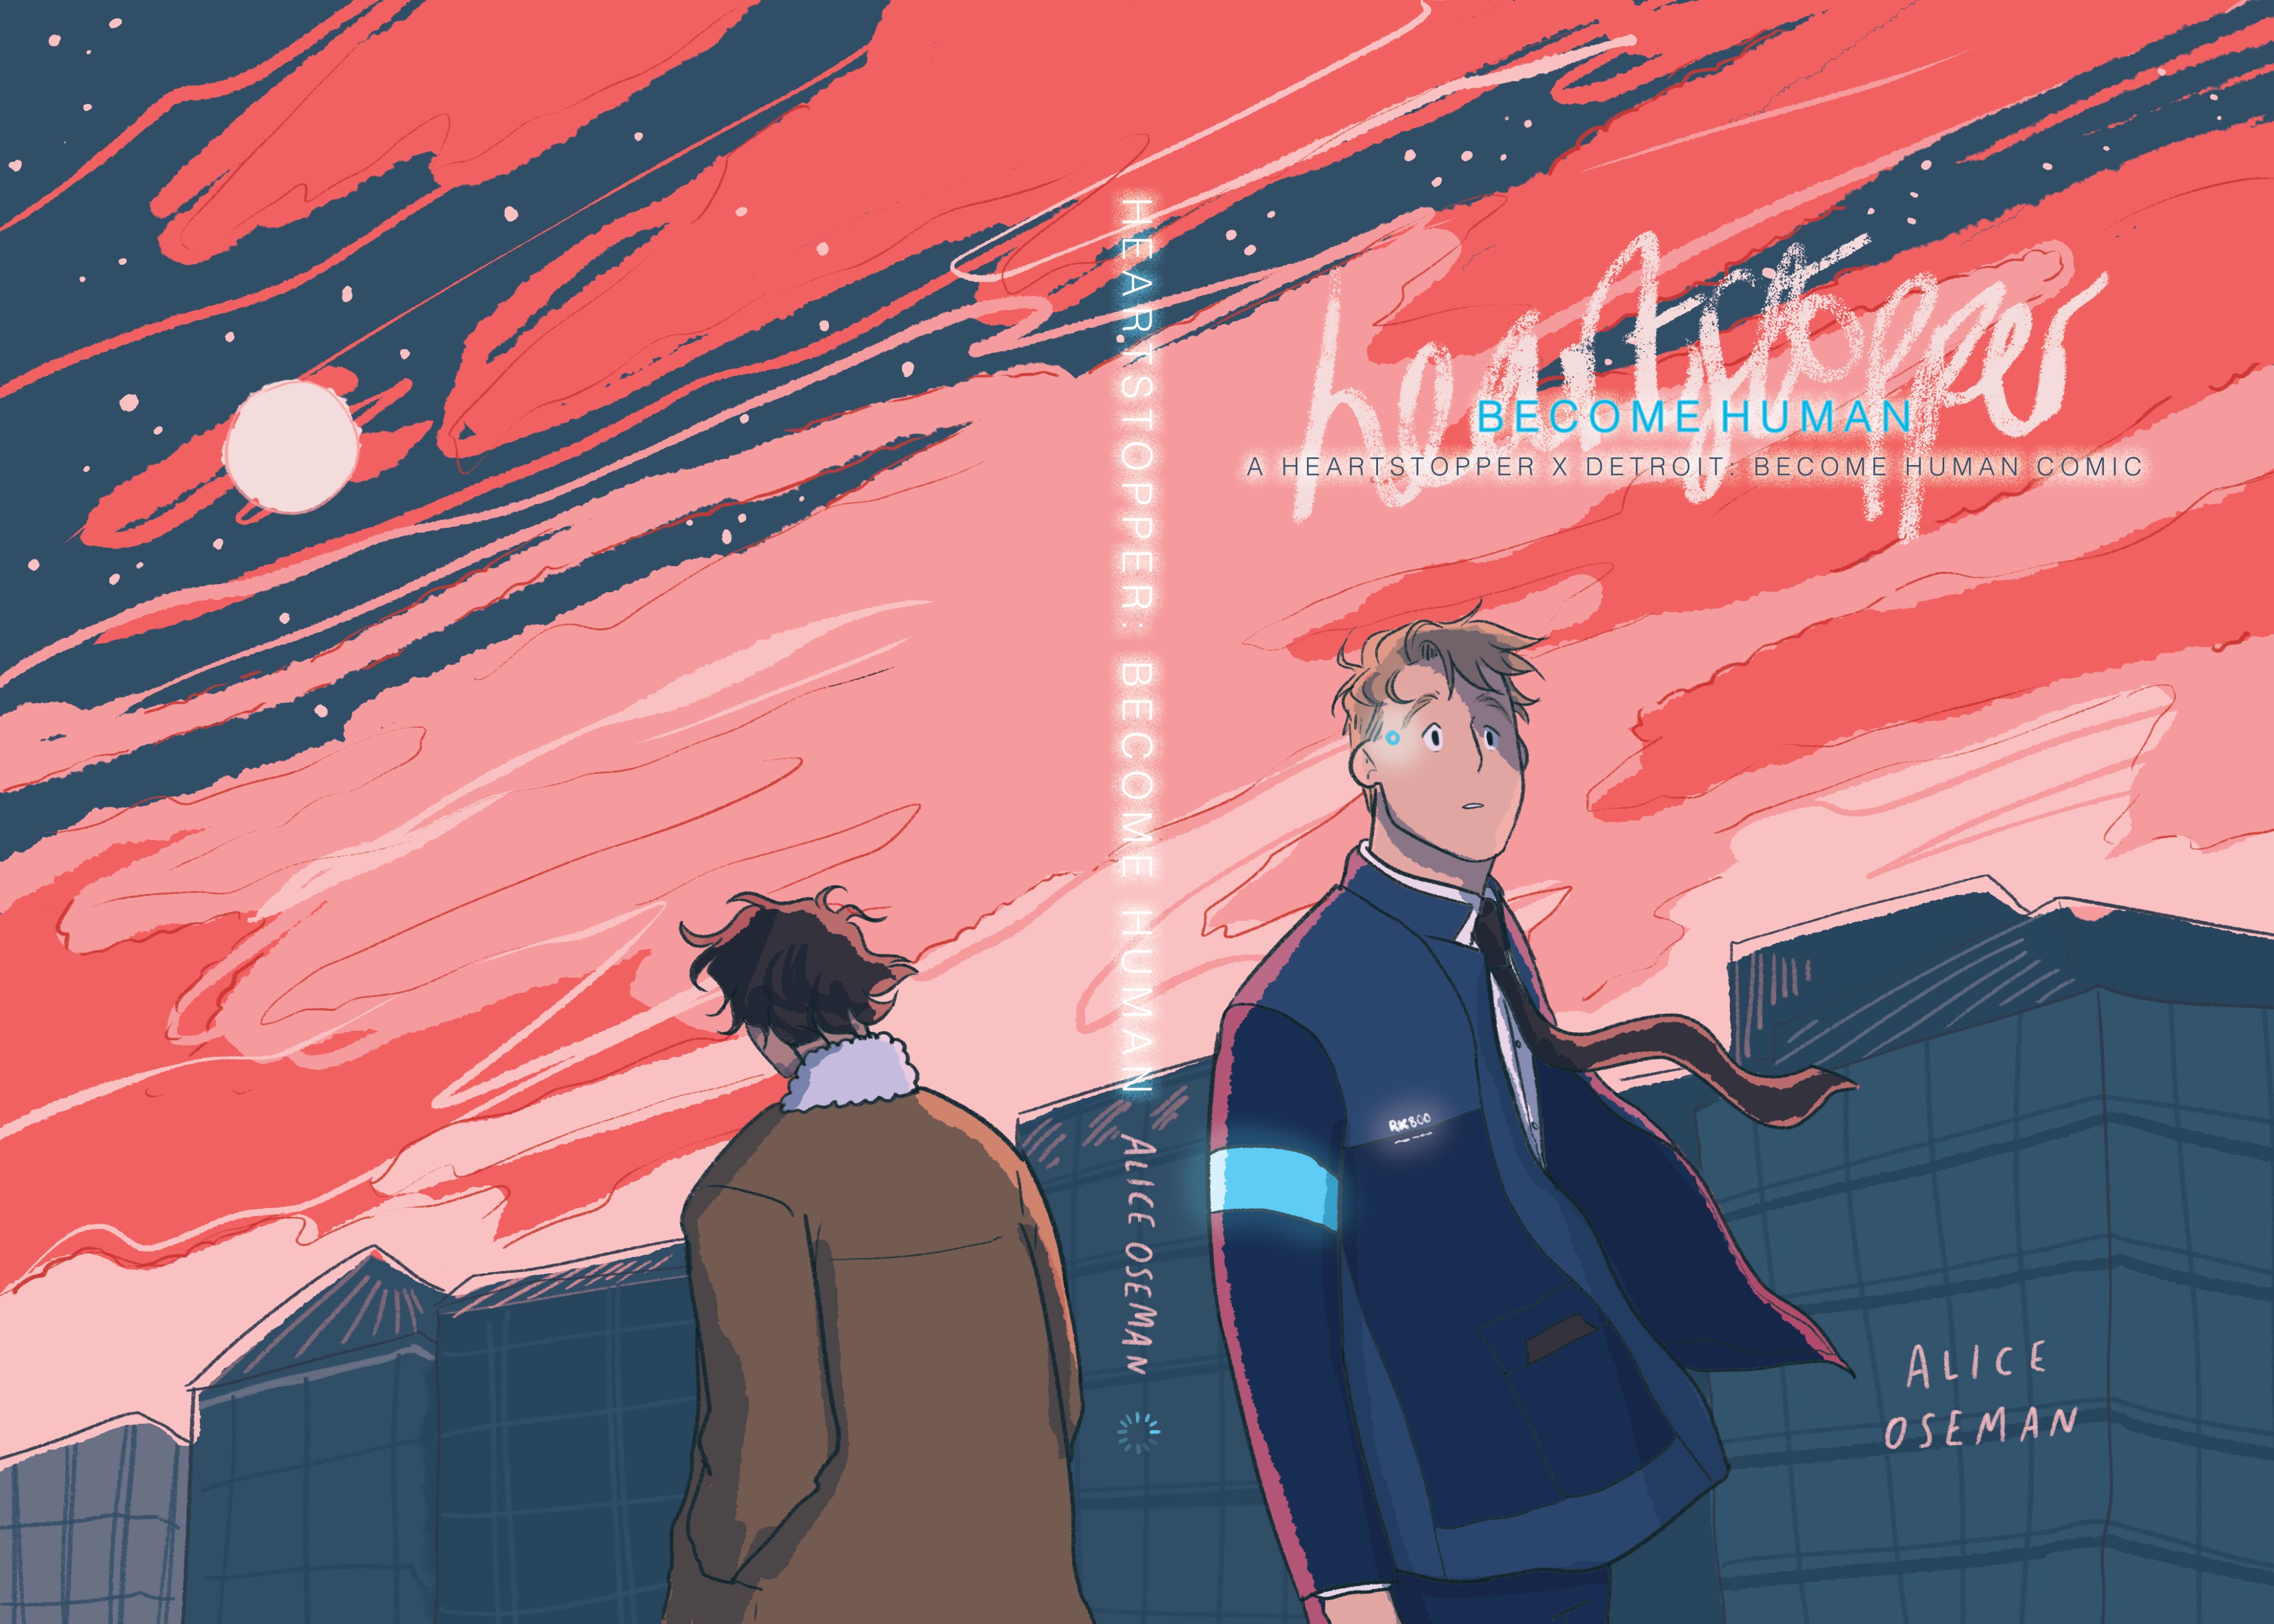 Alice Oseman Updates An Attempt To Provide Something Entertaining While Everyone's Feeling Crappy, I've Uploaded The 126 Page HEARTSTOPPER: BECOME HUMAN Comic, The Detective Android AU